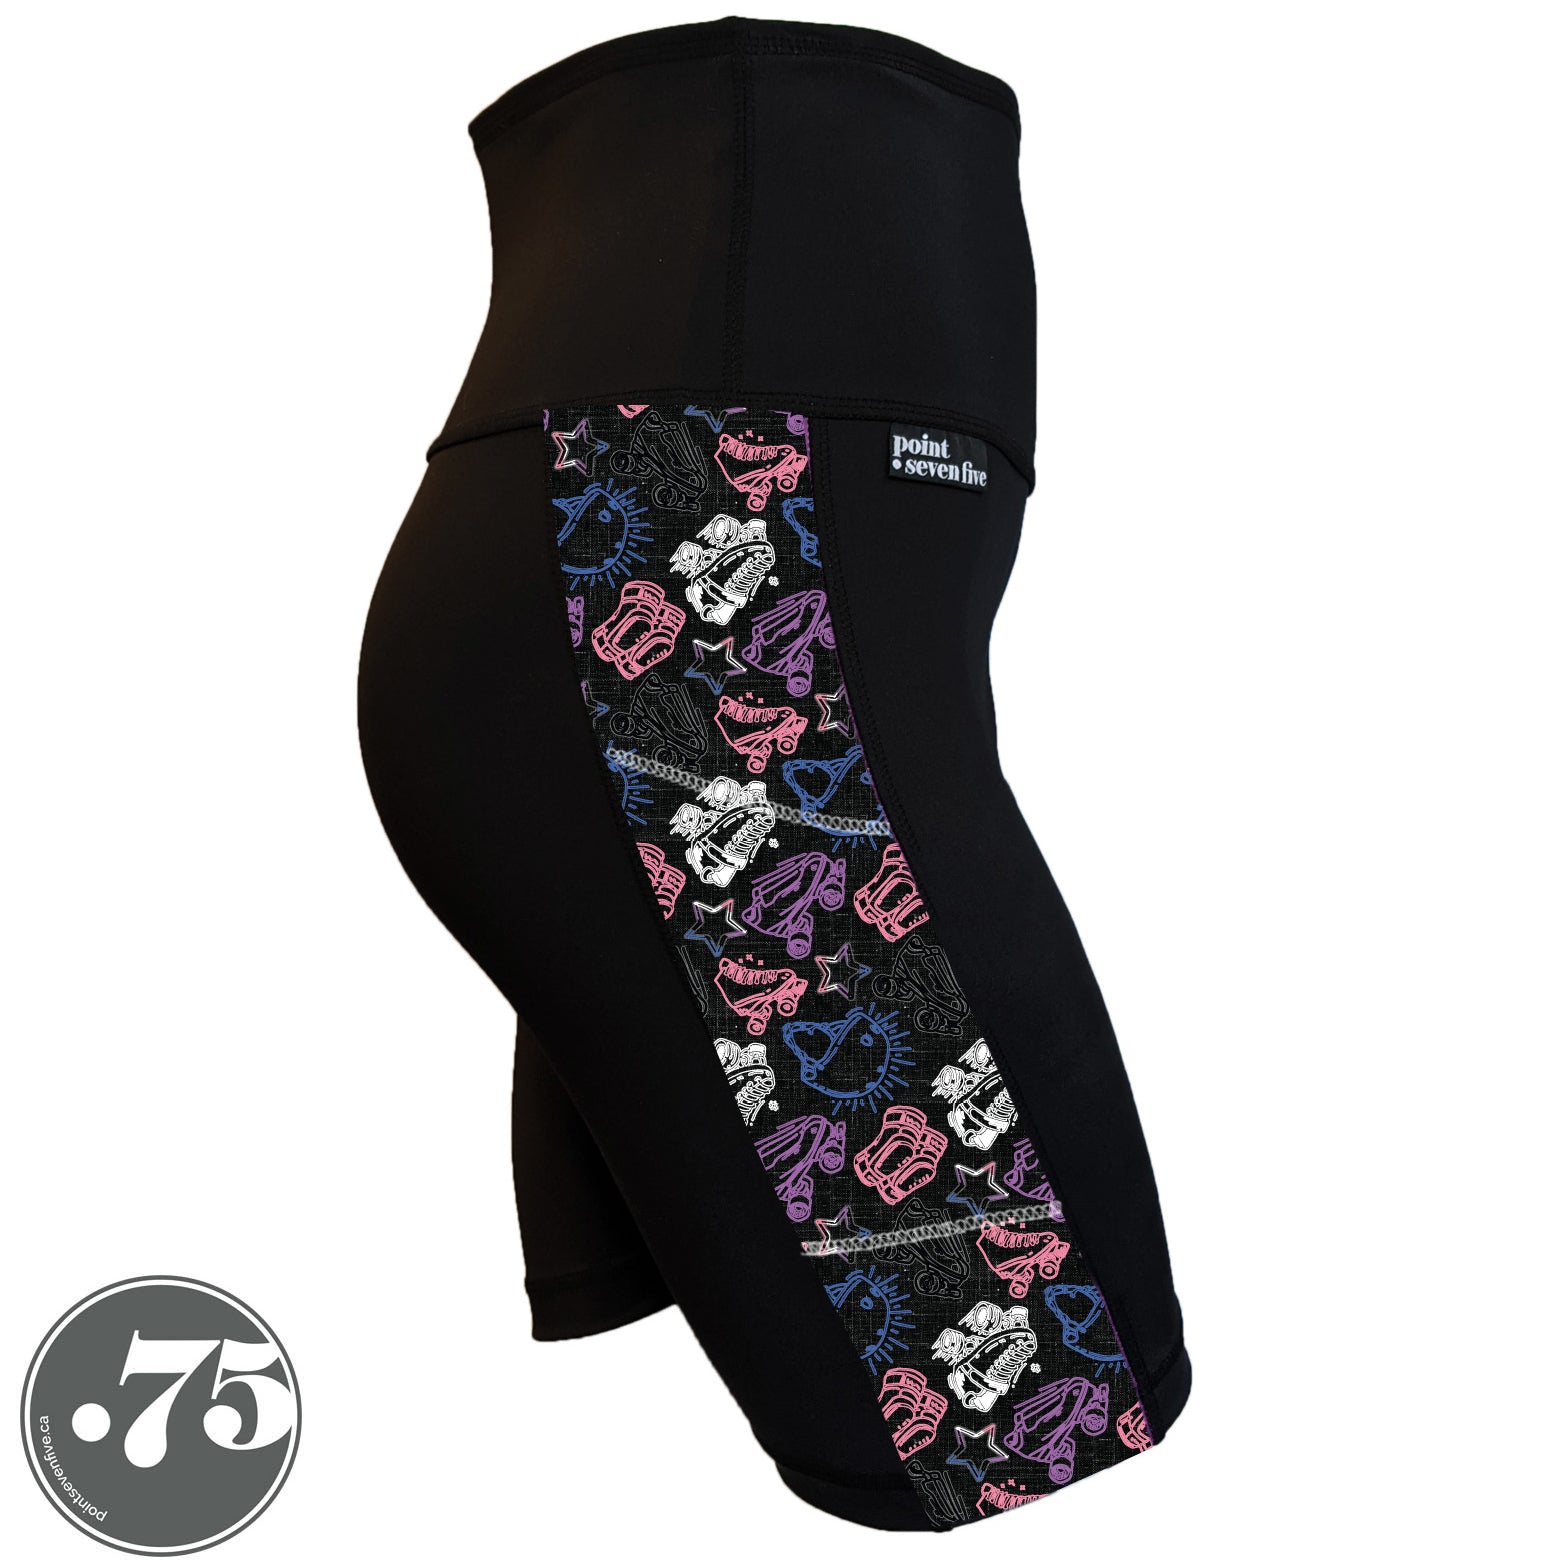 A pair of black spandex skate length shorts on a mannequin, the leggings have a 3.5” wide stripe down the side that has a printed fabric with rollerskates, helmets, stars & knee pads. The graphics are in the colours of the Gender Fluid Pride Flag colours white, pink, blue and purple.